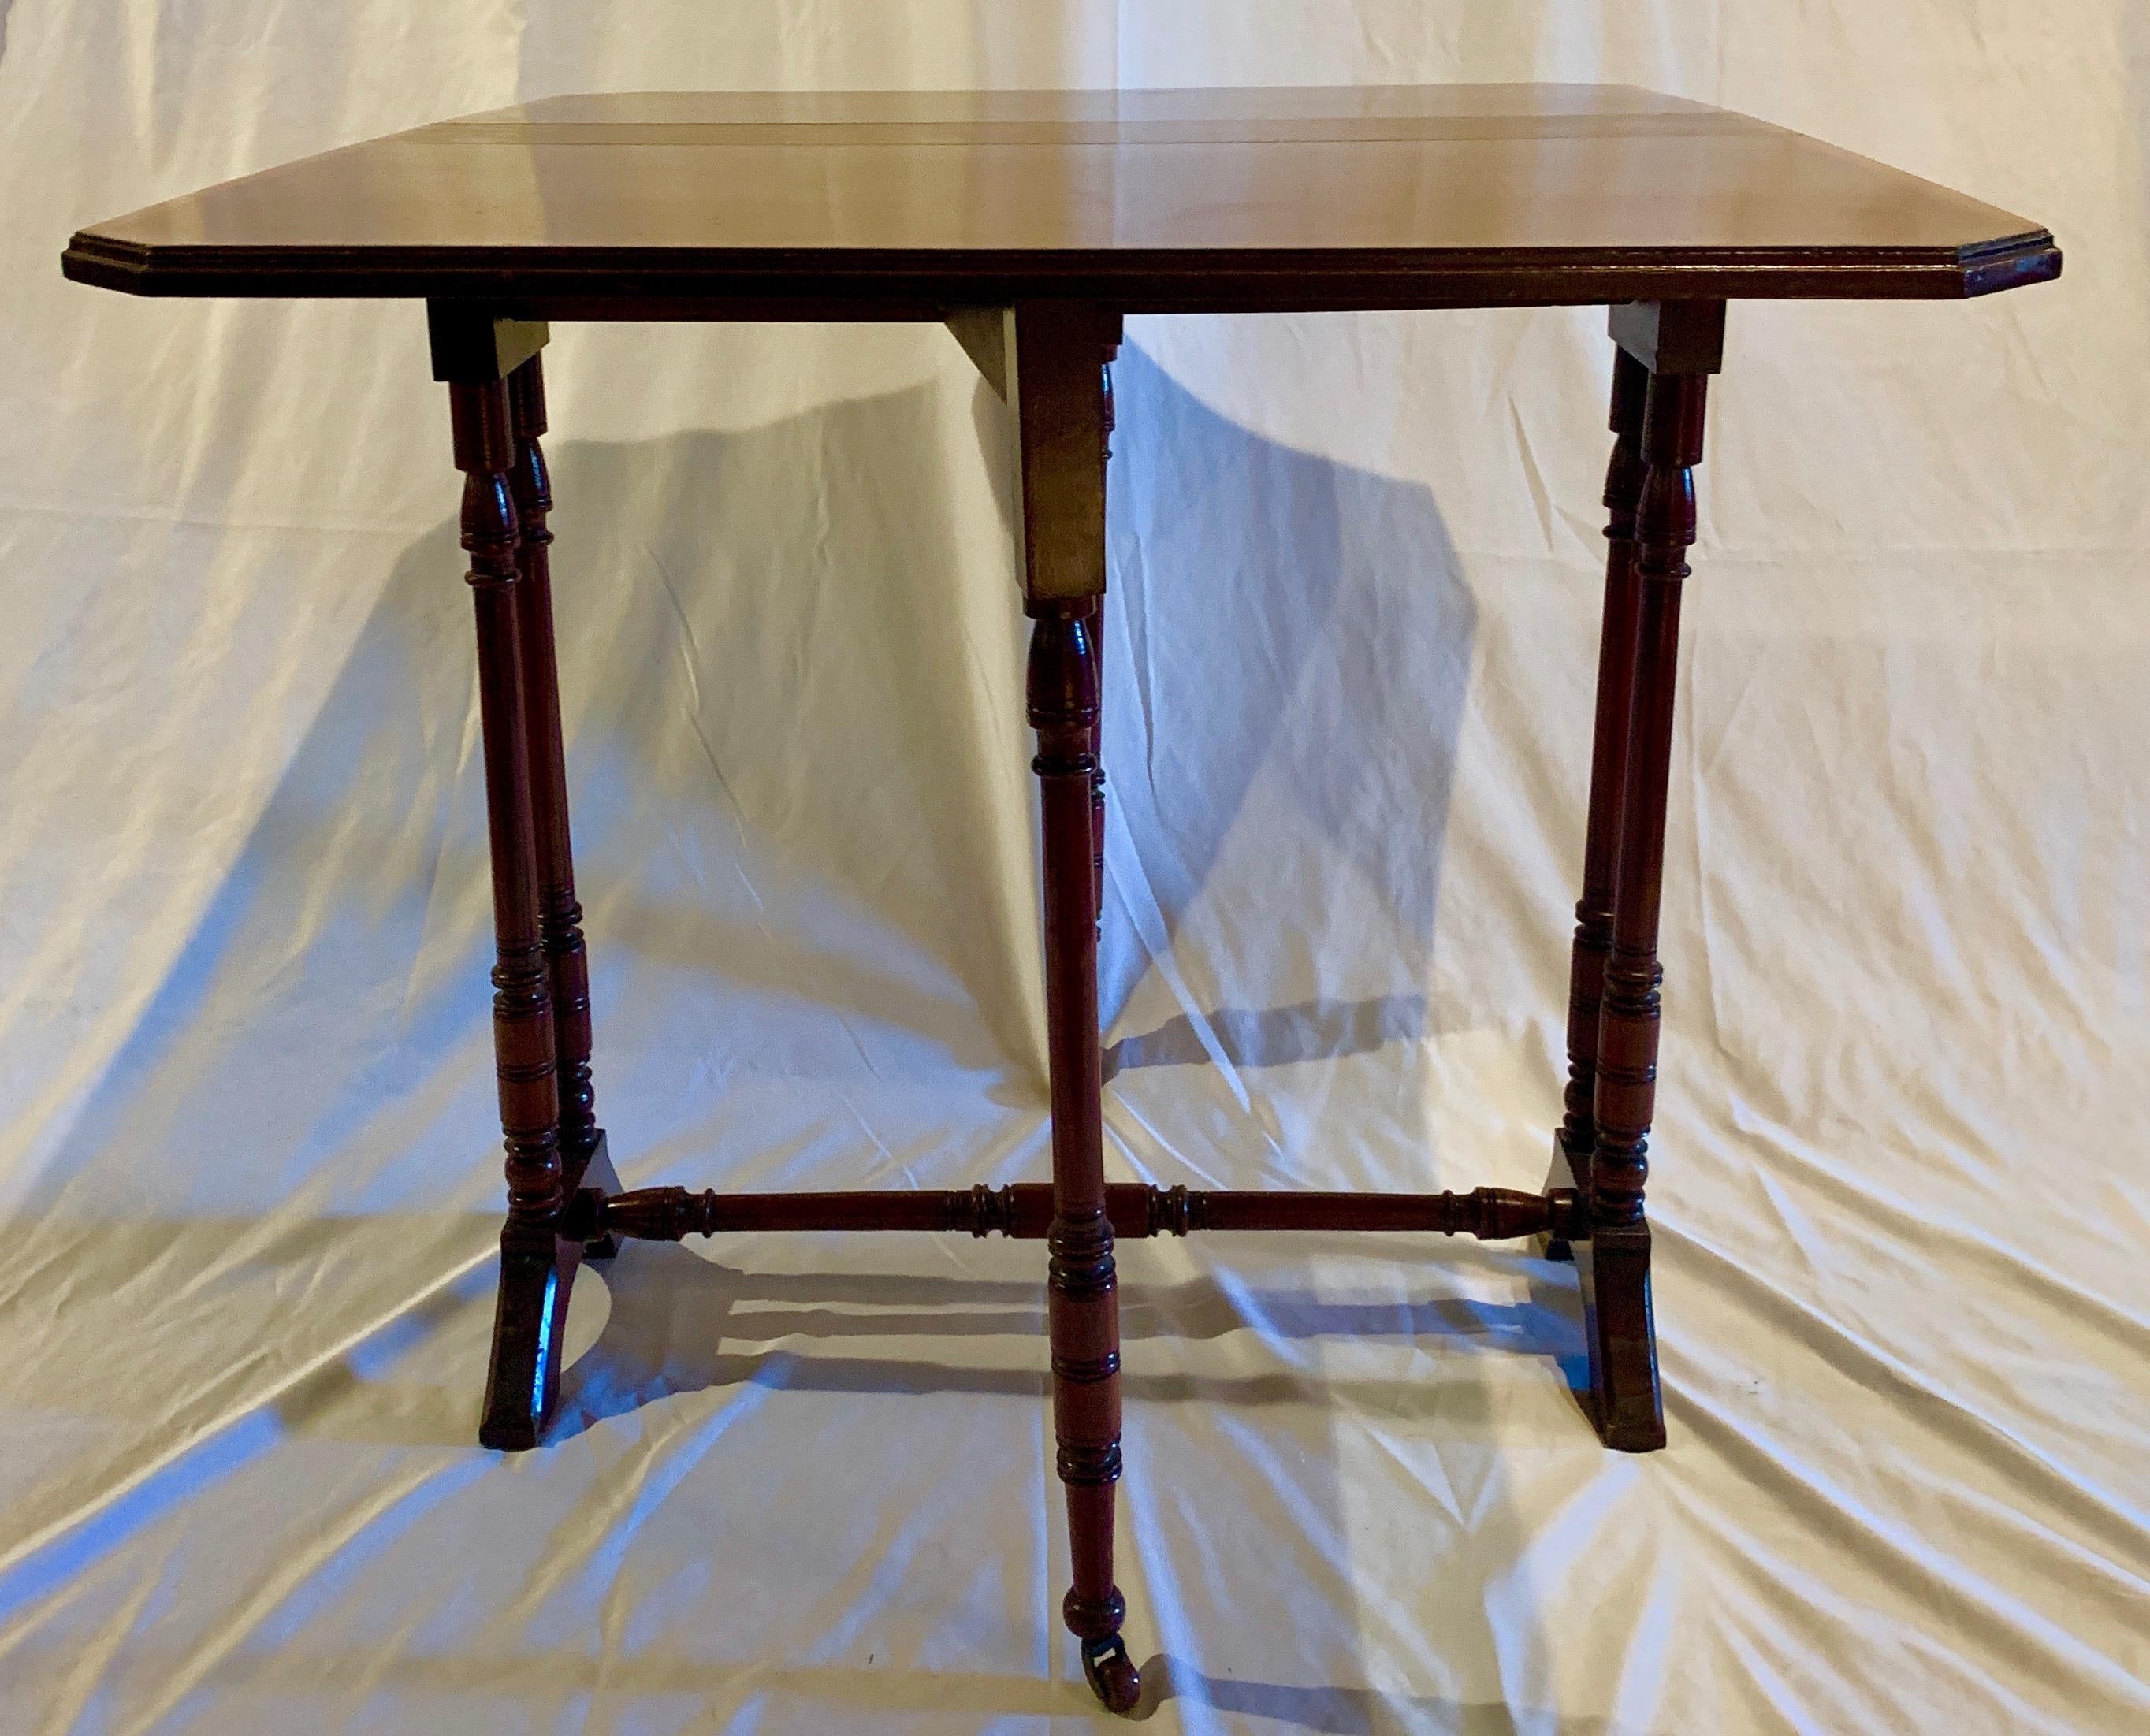 Antique English Sheraton drop-leaf table with nice banding. Its pleasing, straight forward lines will allow this table to marry with many other furniture styles.
 